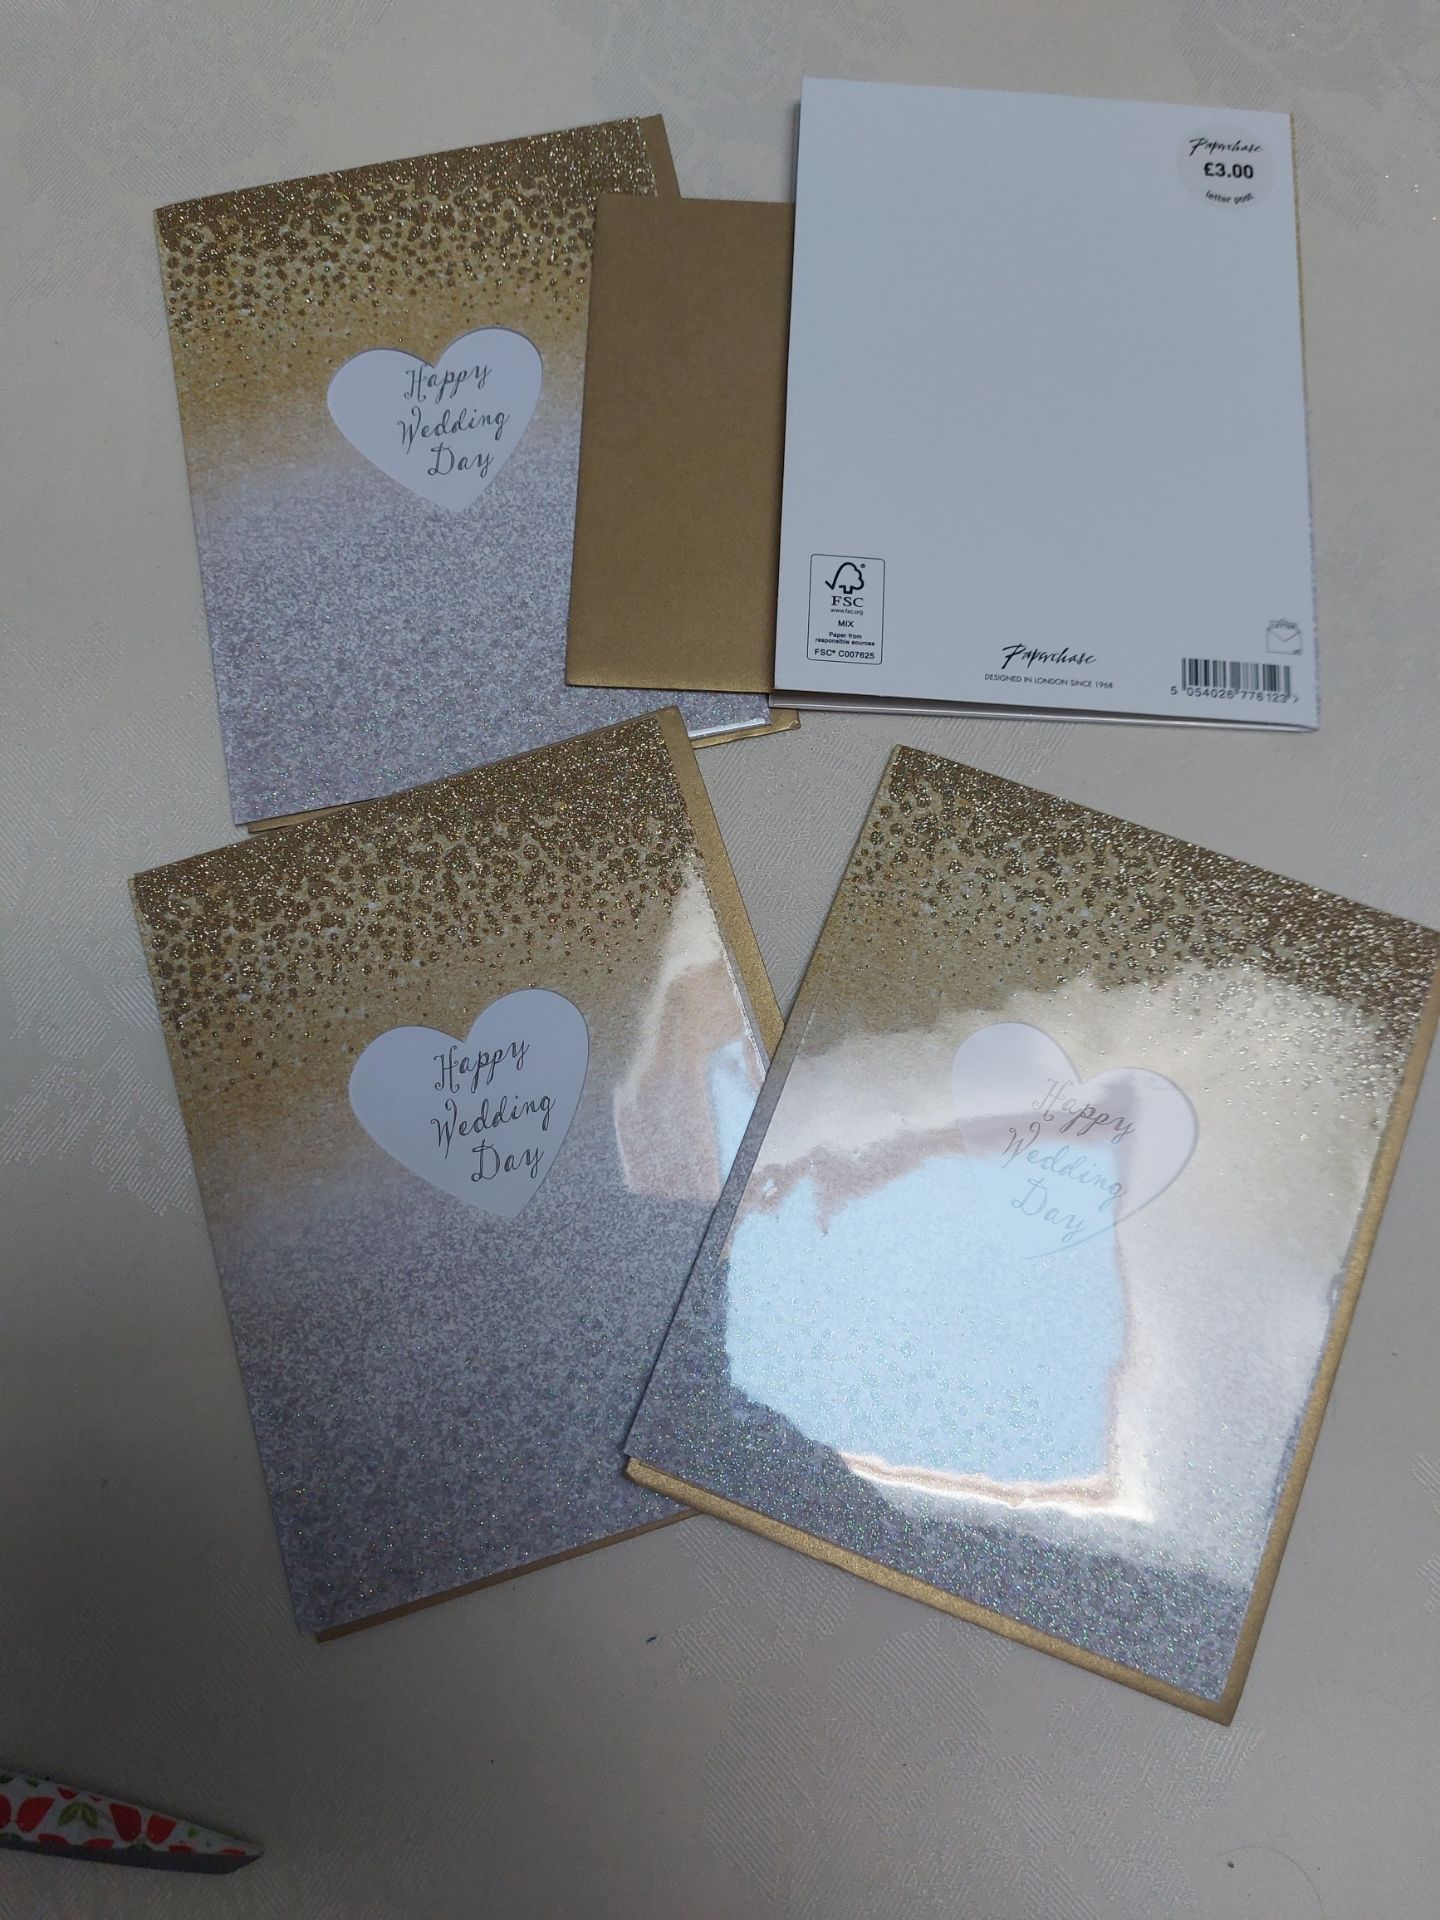 Wedding Cards - Box of 48. £3.00 RRP Each, From Paperchase - Image 4 of 8